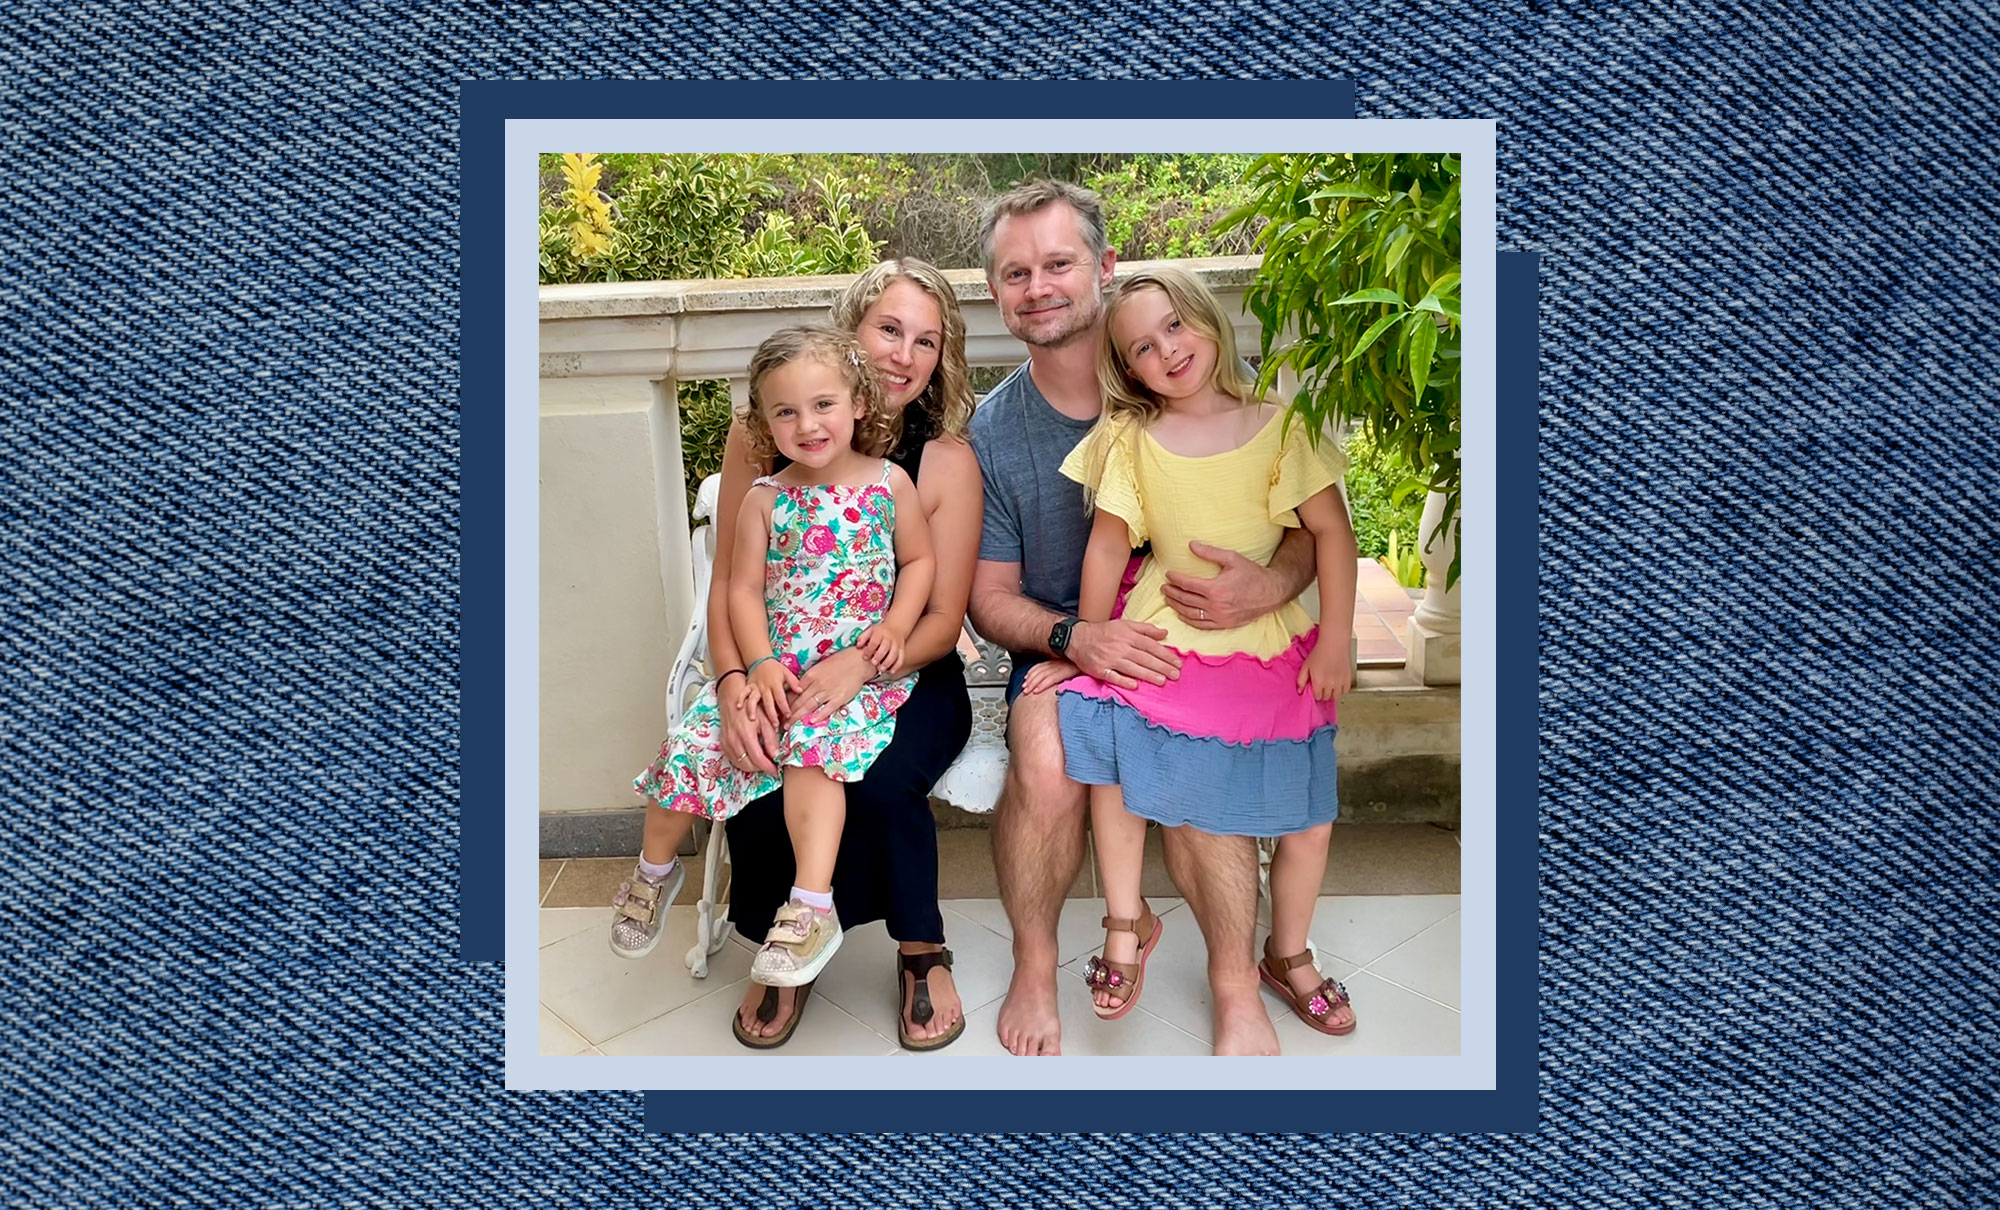 Dockers® CEO Natalie MacLennan sits with her two daughters and husband